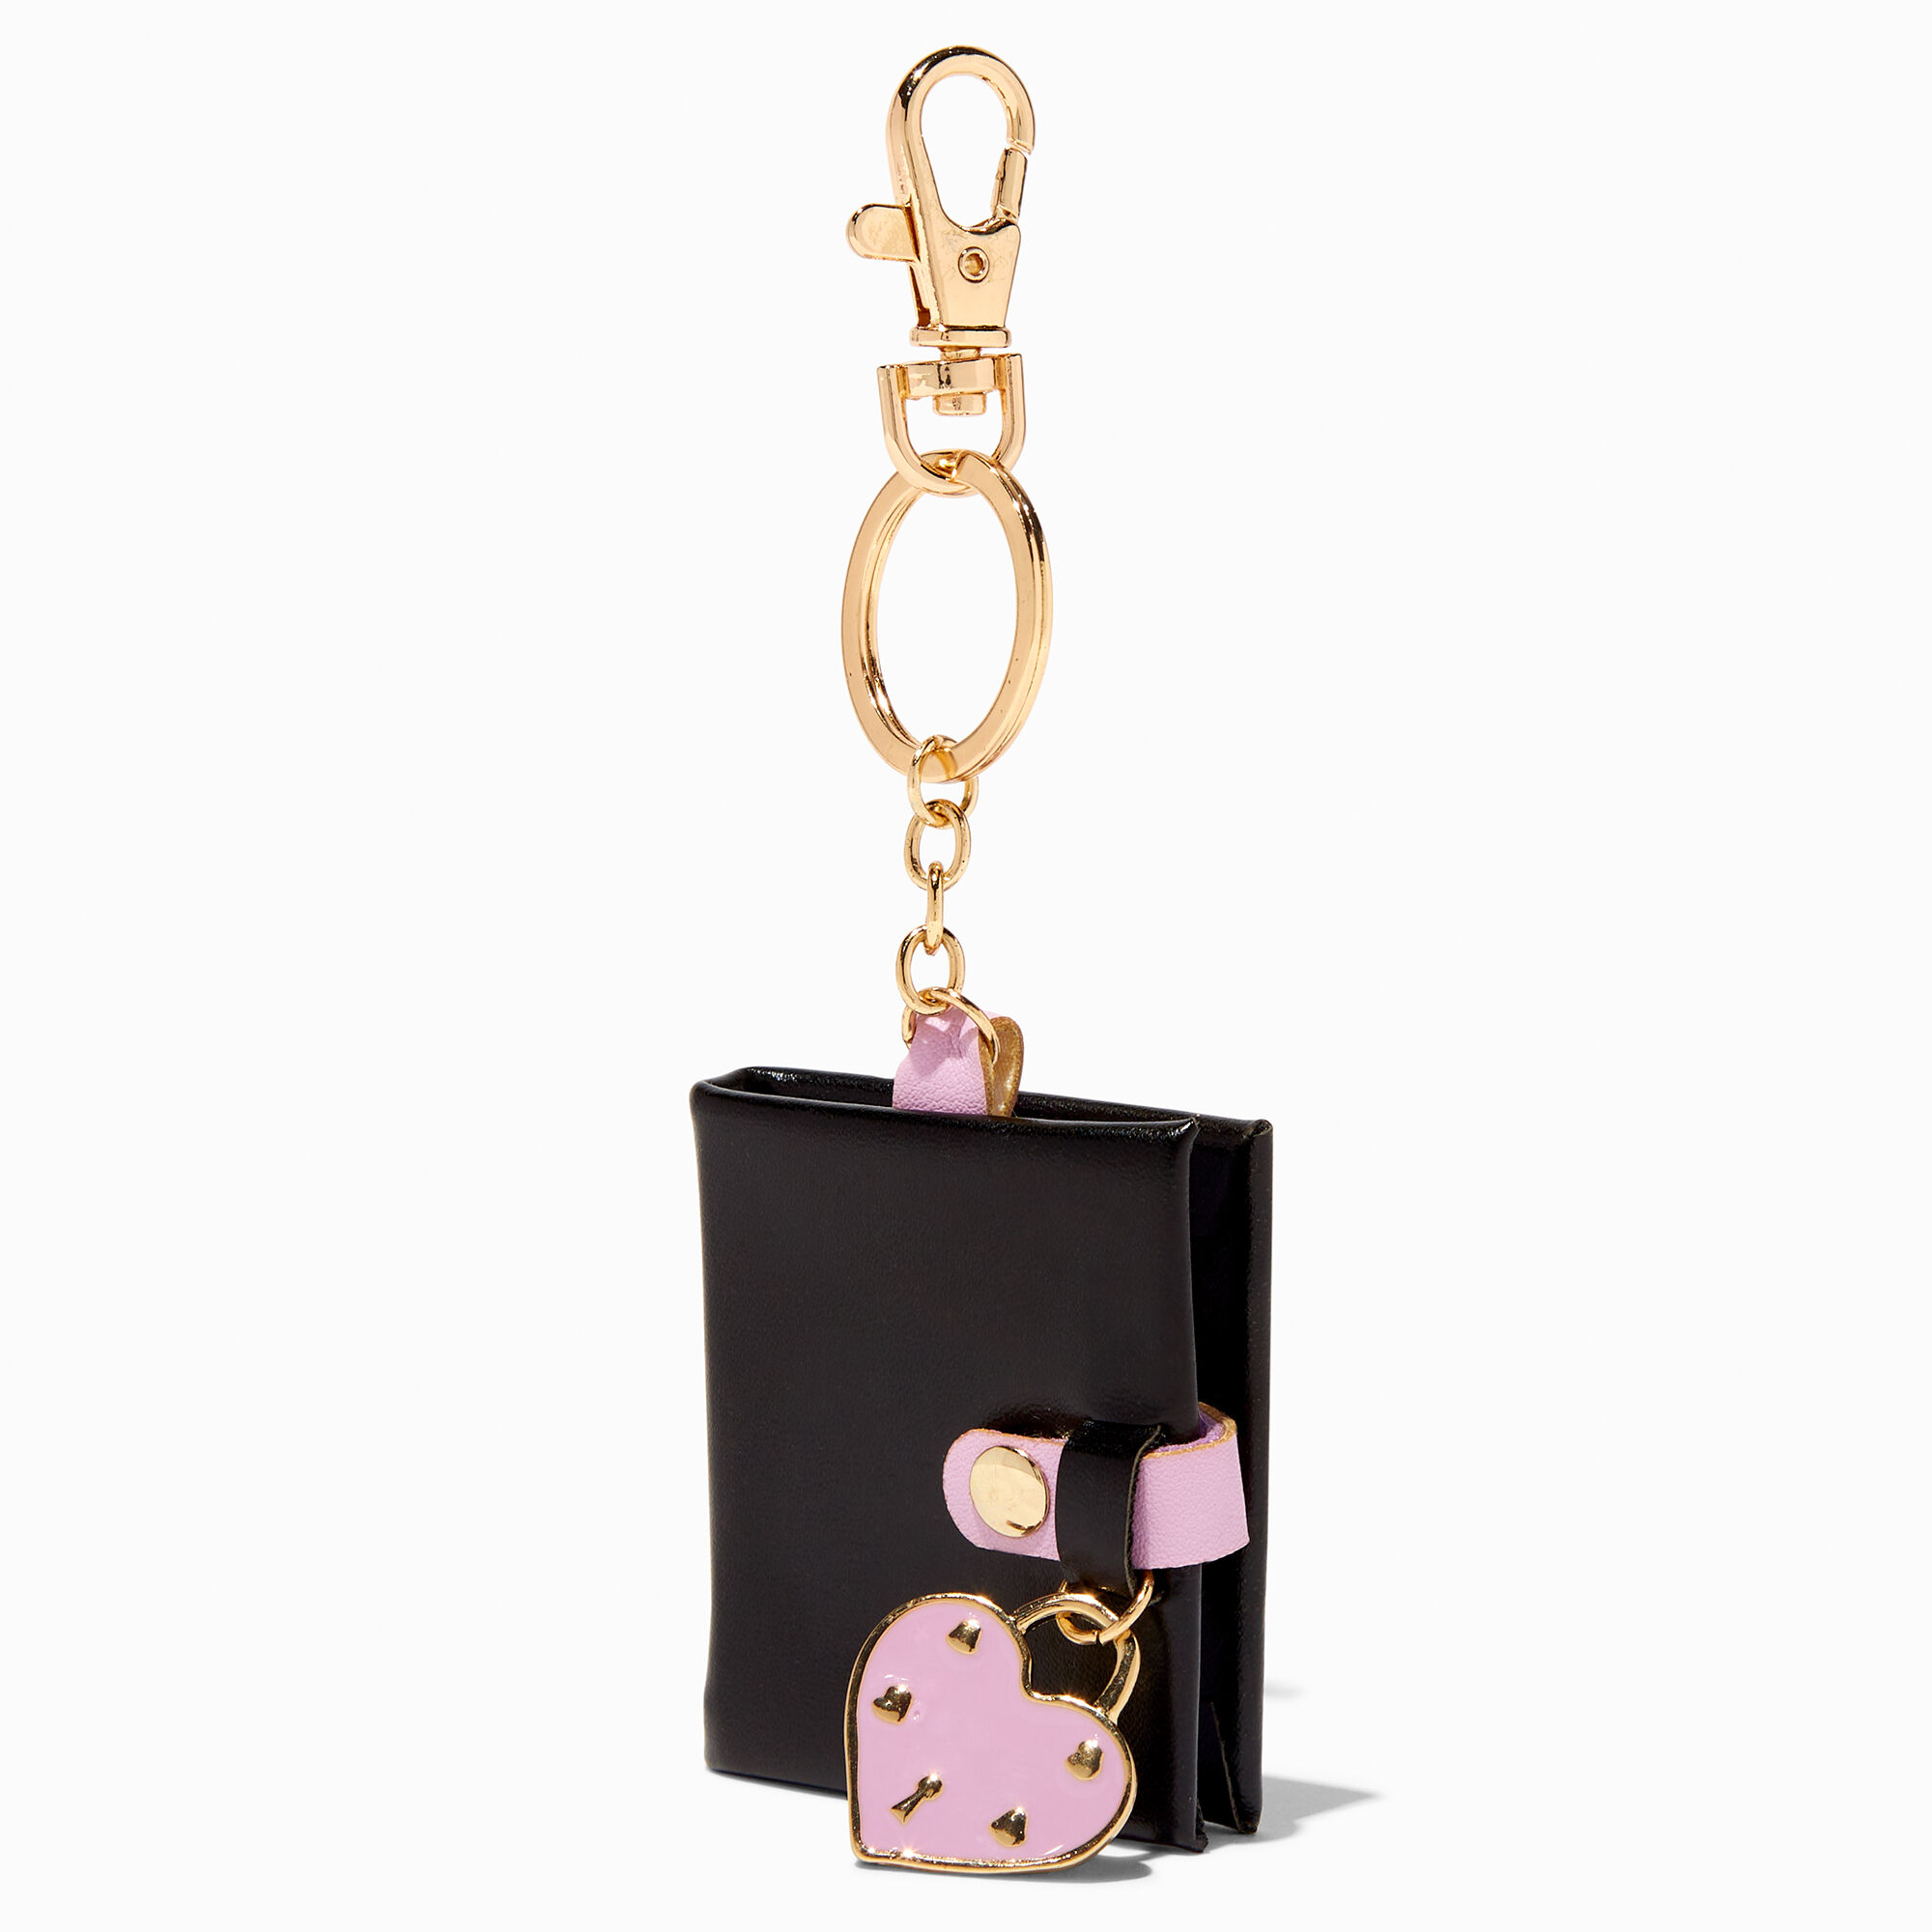 View Claires Purple Heart Charm Mini Diary Keychain Black information